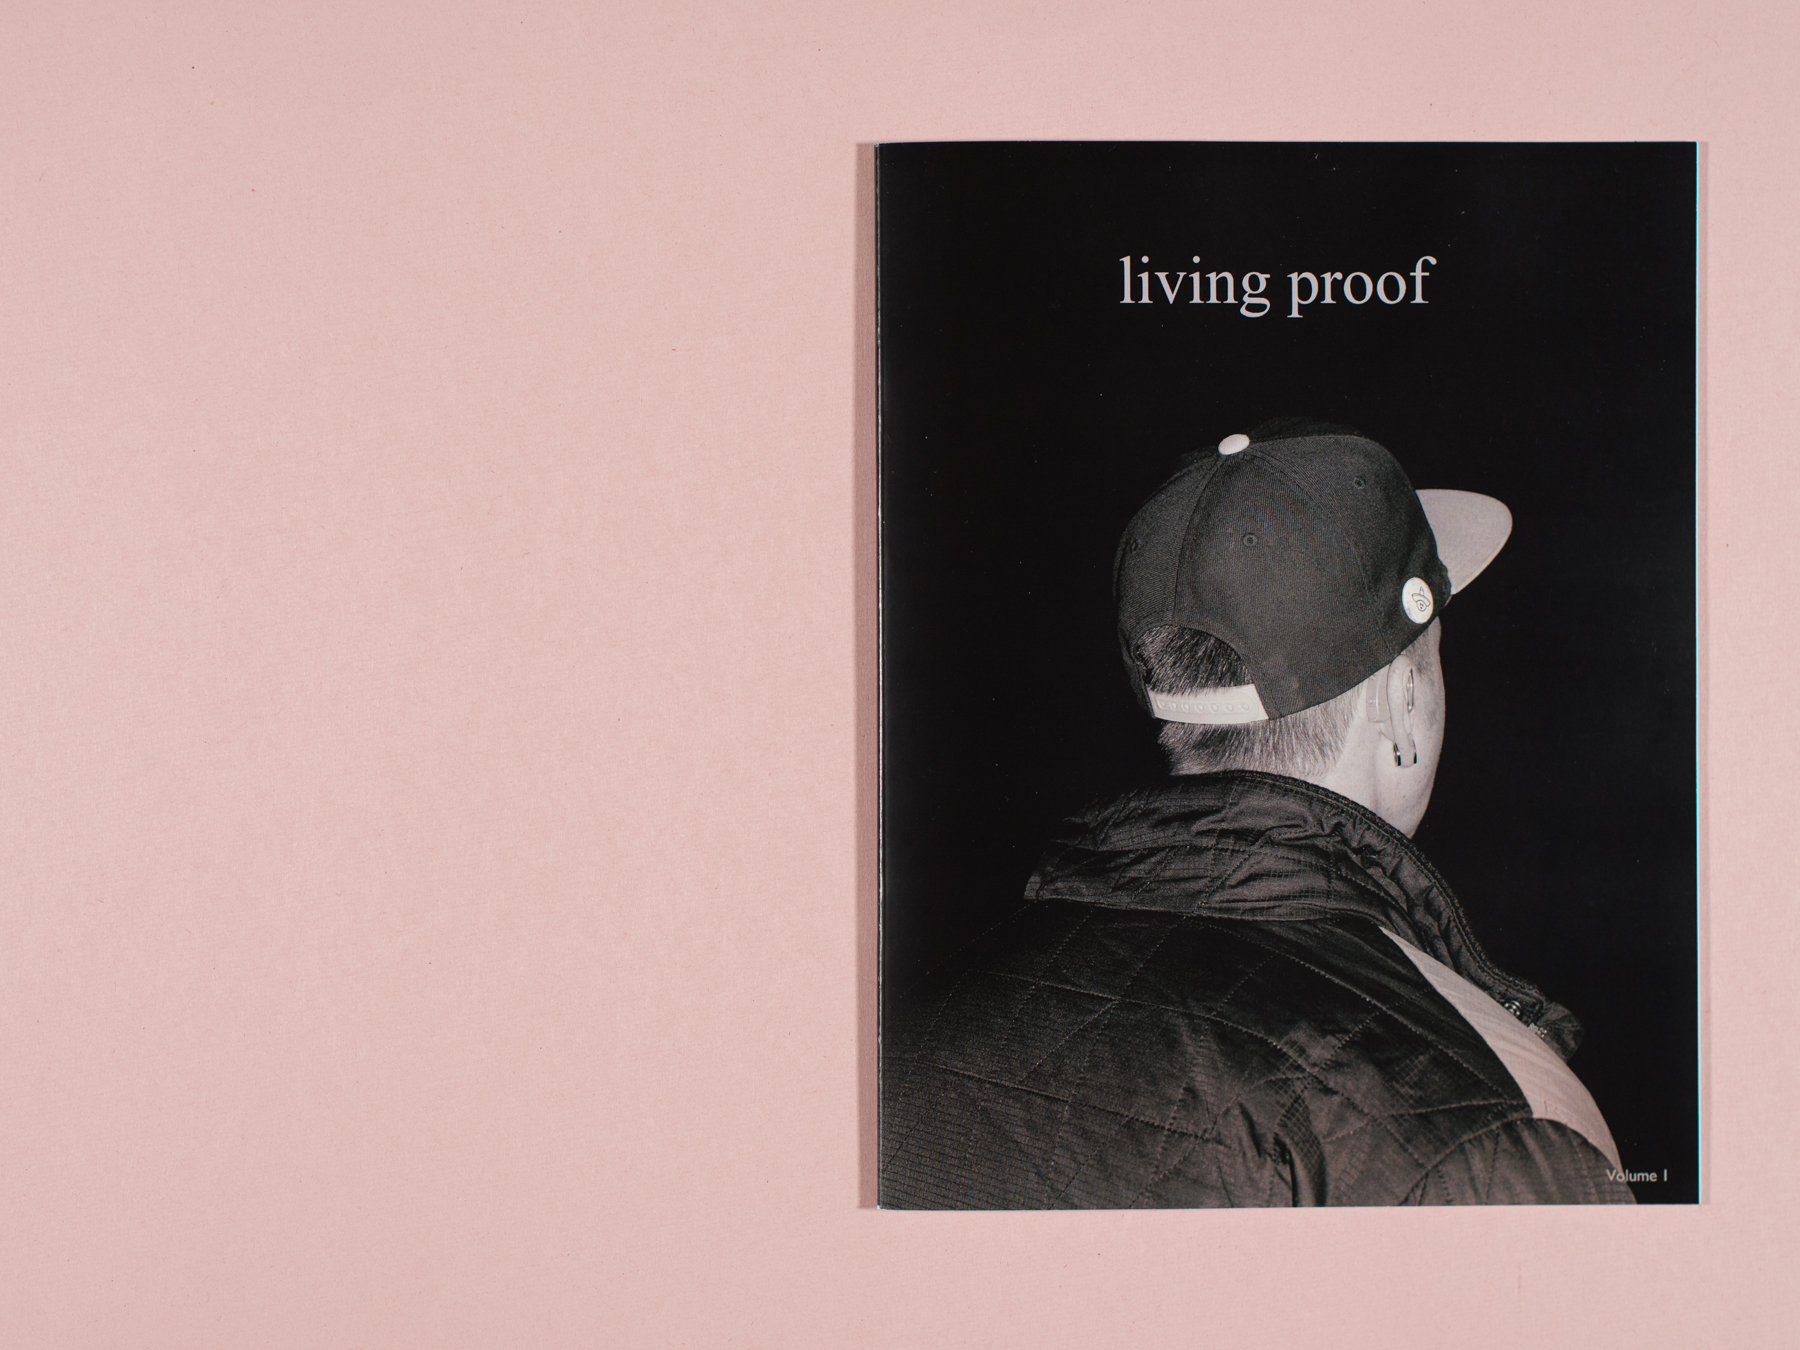   Living Proof Volume I  Winter 2013  Saddle-stitch bound magazine, 40 pages, 8.5"x11", black and white   Edition of 20 , signed&nbsp;  $15&nbsp; ( contact &nbsp;for purchases)  A collaboration between Madison McKenna and her brother, James McKenna (